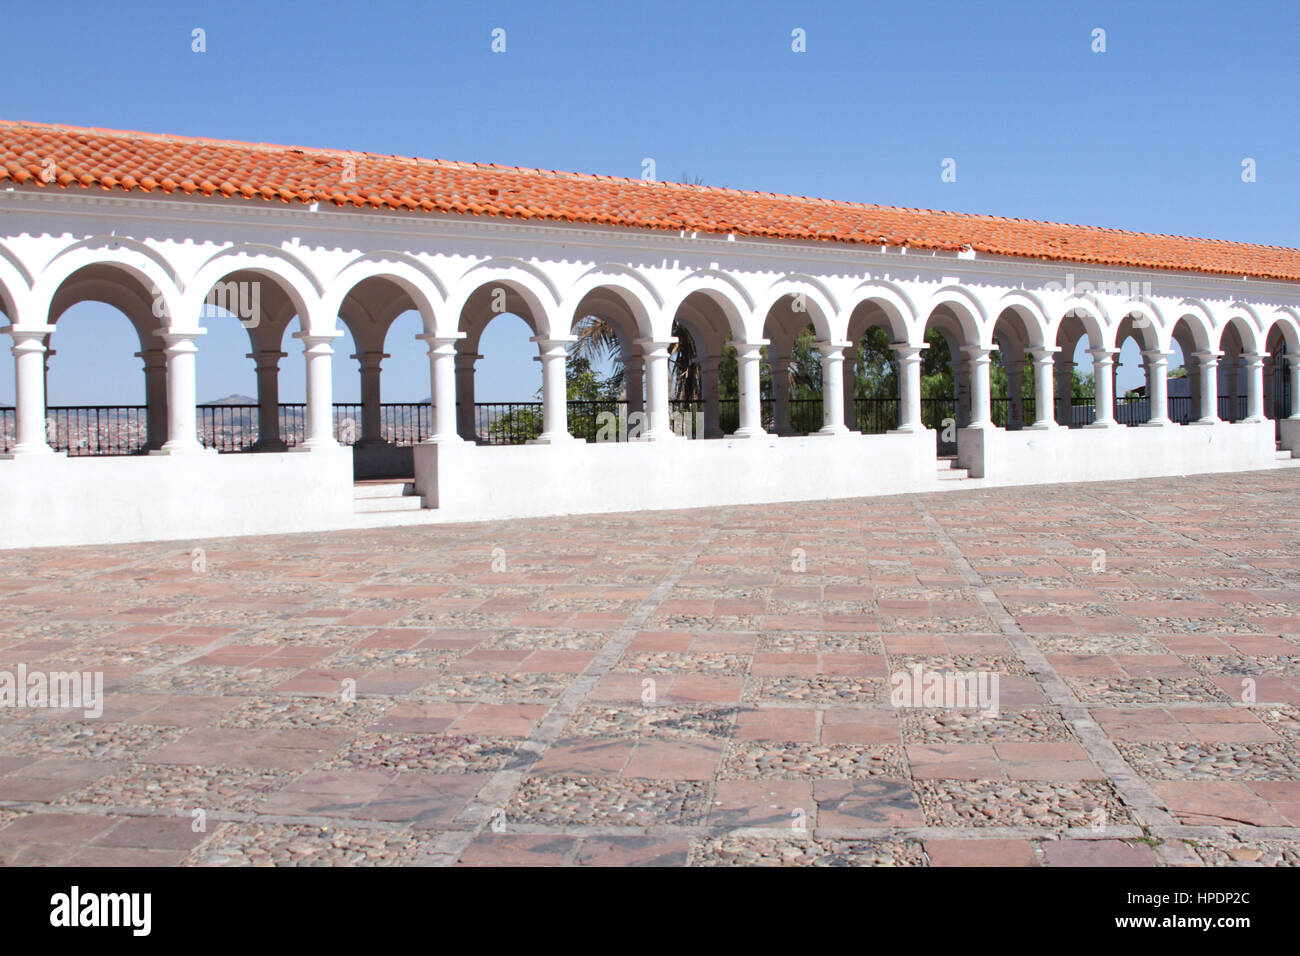 Covered overlook called El Mirador with white arches on La Recoleta Plaza in Sucre, Bolivia Stock Photo